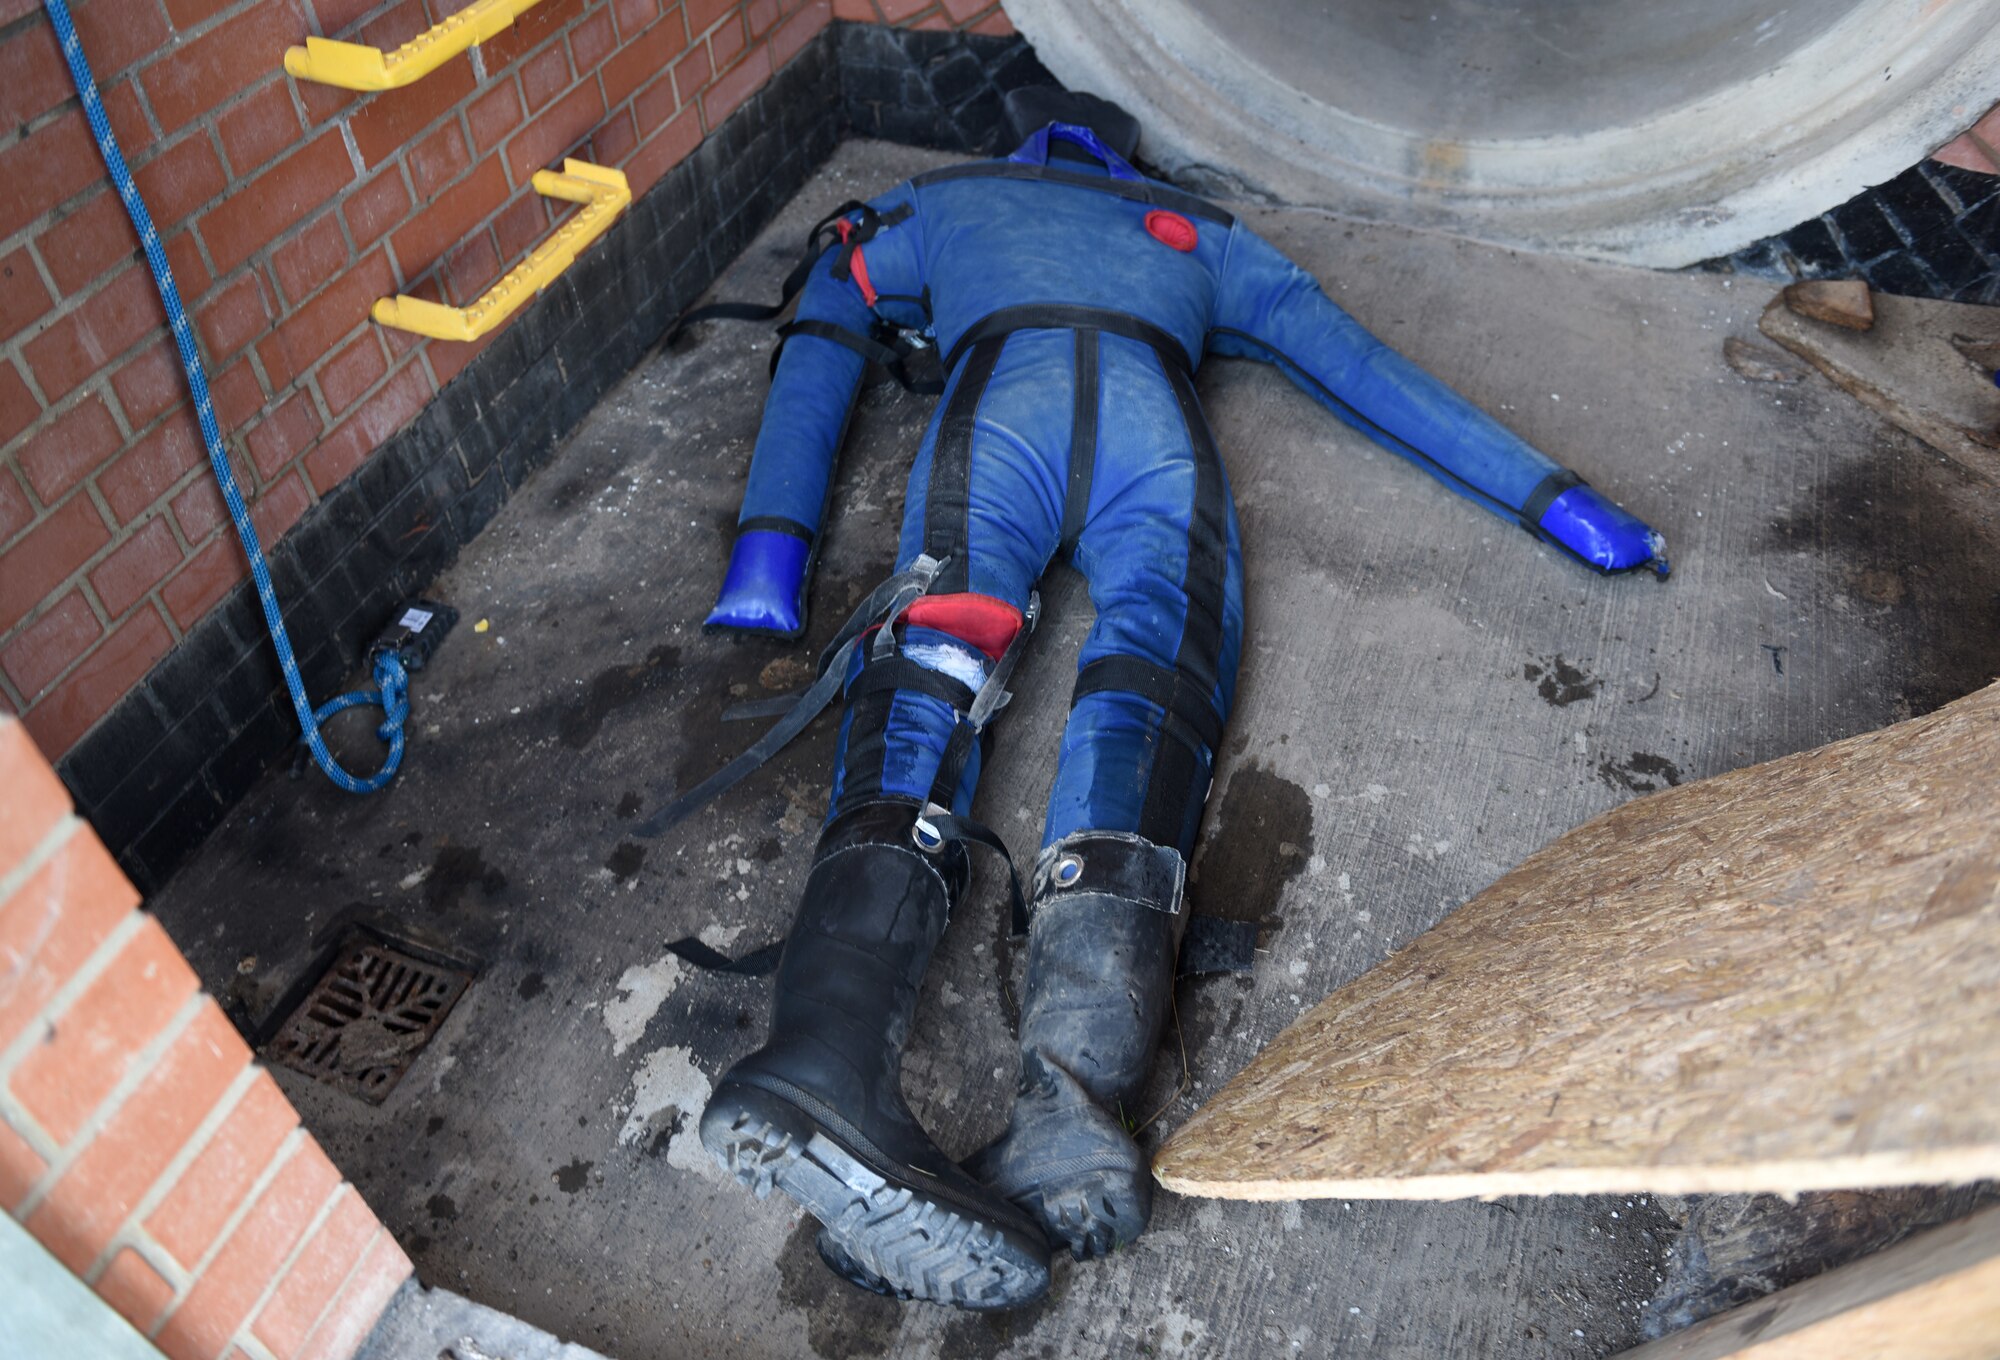 A simulated casualty lays at the bottom of a facility as part of confined space training for 100th Civil Engineer Squadron firefighters at Royal Air Force Mildenhall, England, April 14, 2022. The training scenario was that a teenager (simulated by a mannequin) was playing and climbing down inside the building to check it out, when he fell and injured himself. In the scenario, a firefighter climbed down to rescue the casualty but slipped on a broken step, sustained injuries, and also had to be rescued. (U.S. Air Force photo by Karen Abeyasekere)